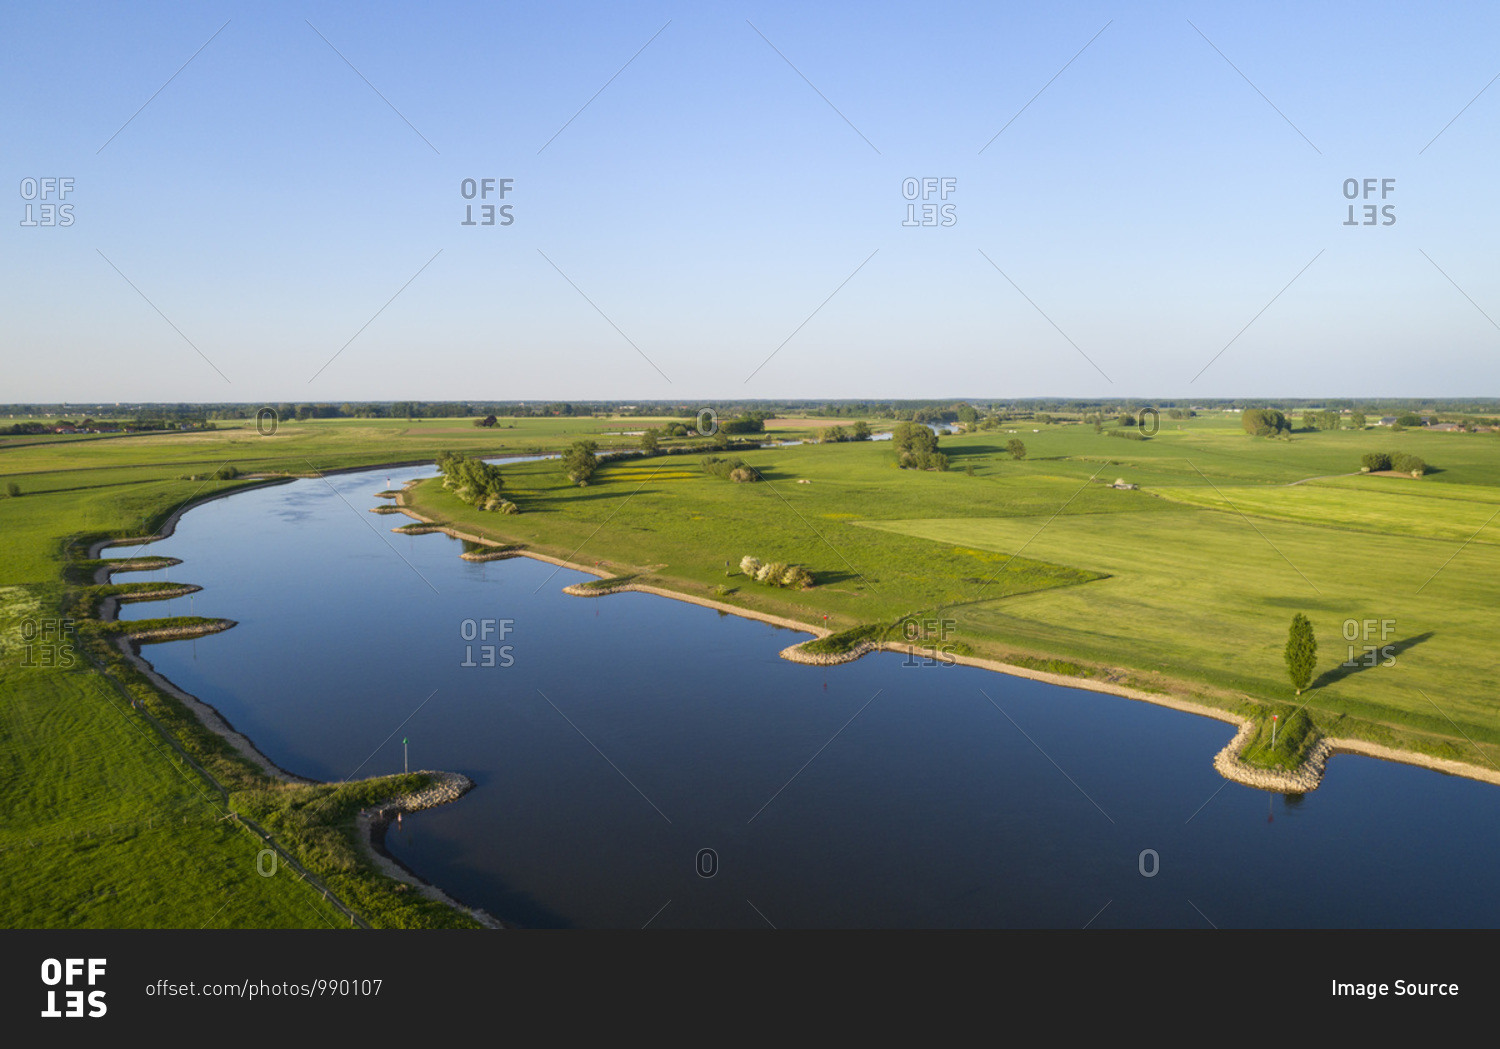 High angle view of Ijssel river, The Netherlands.